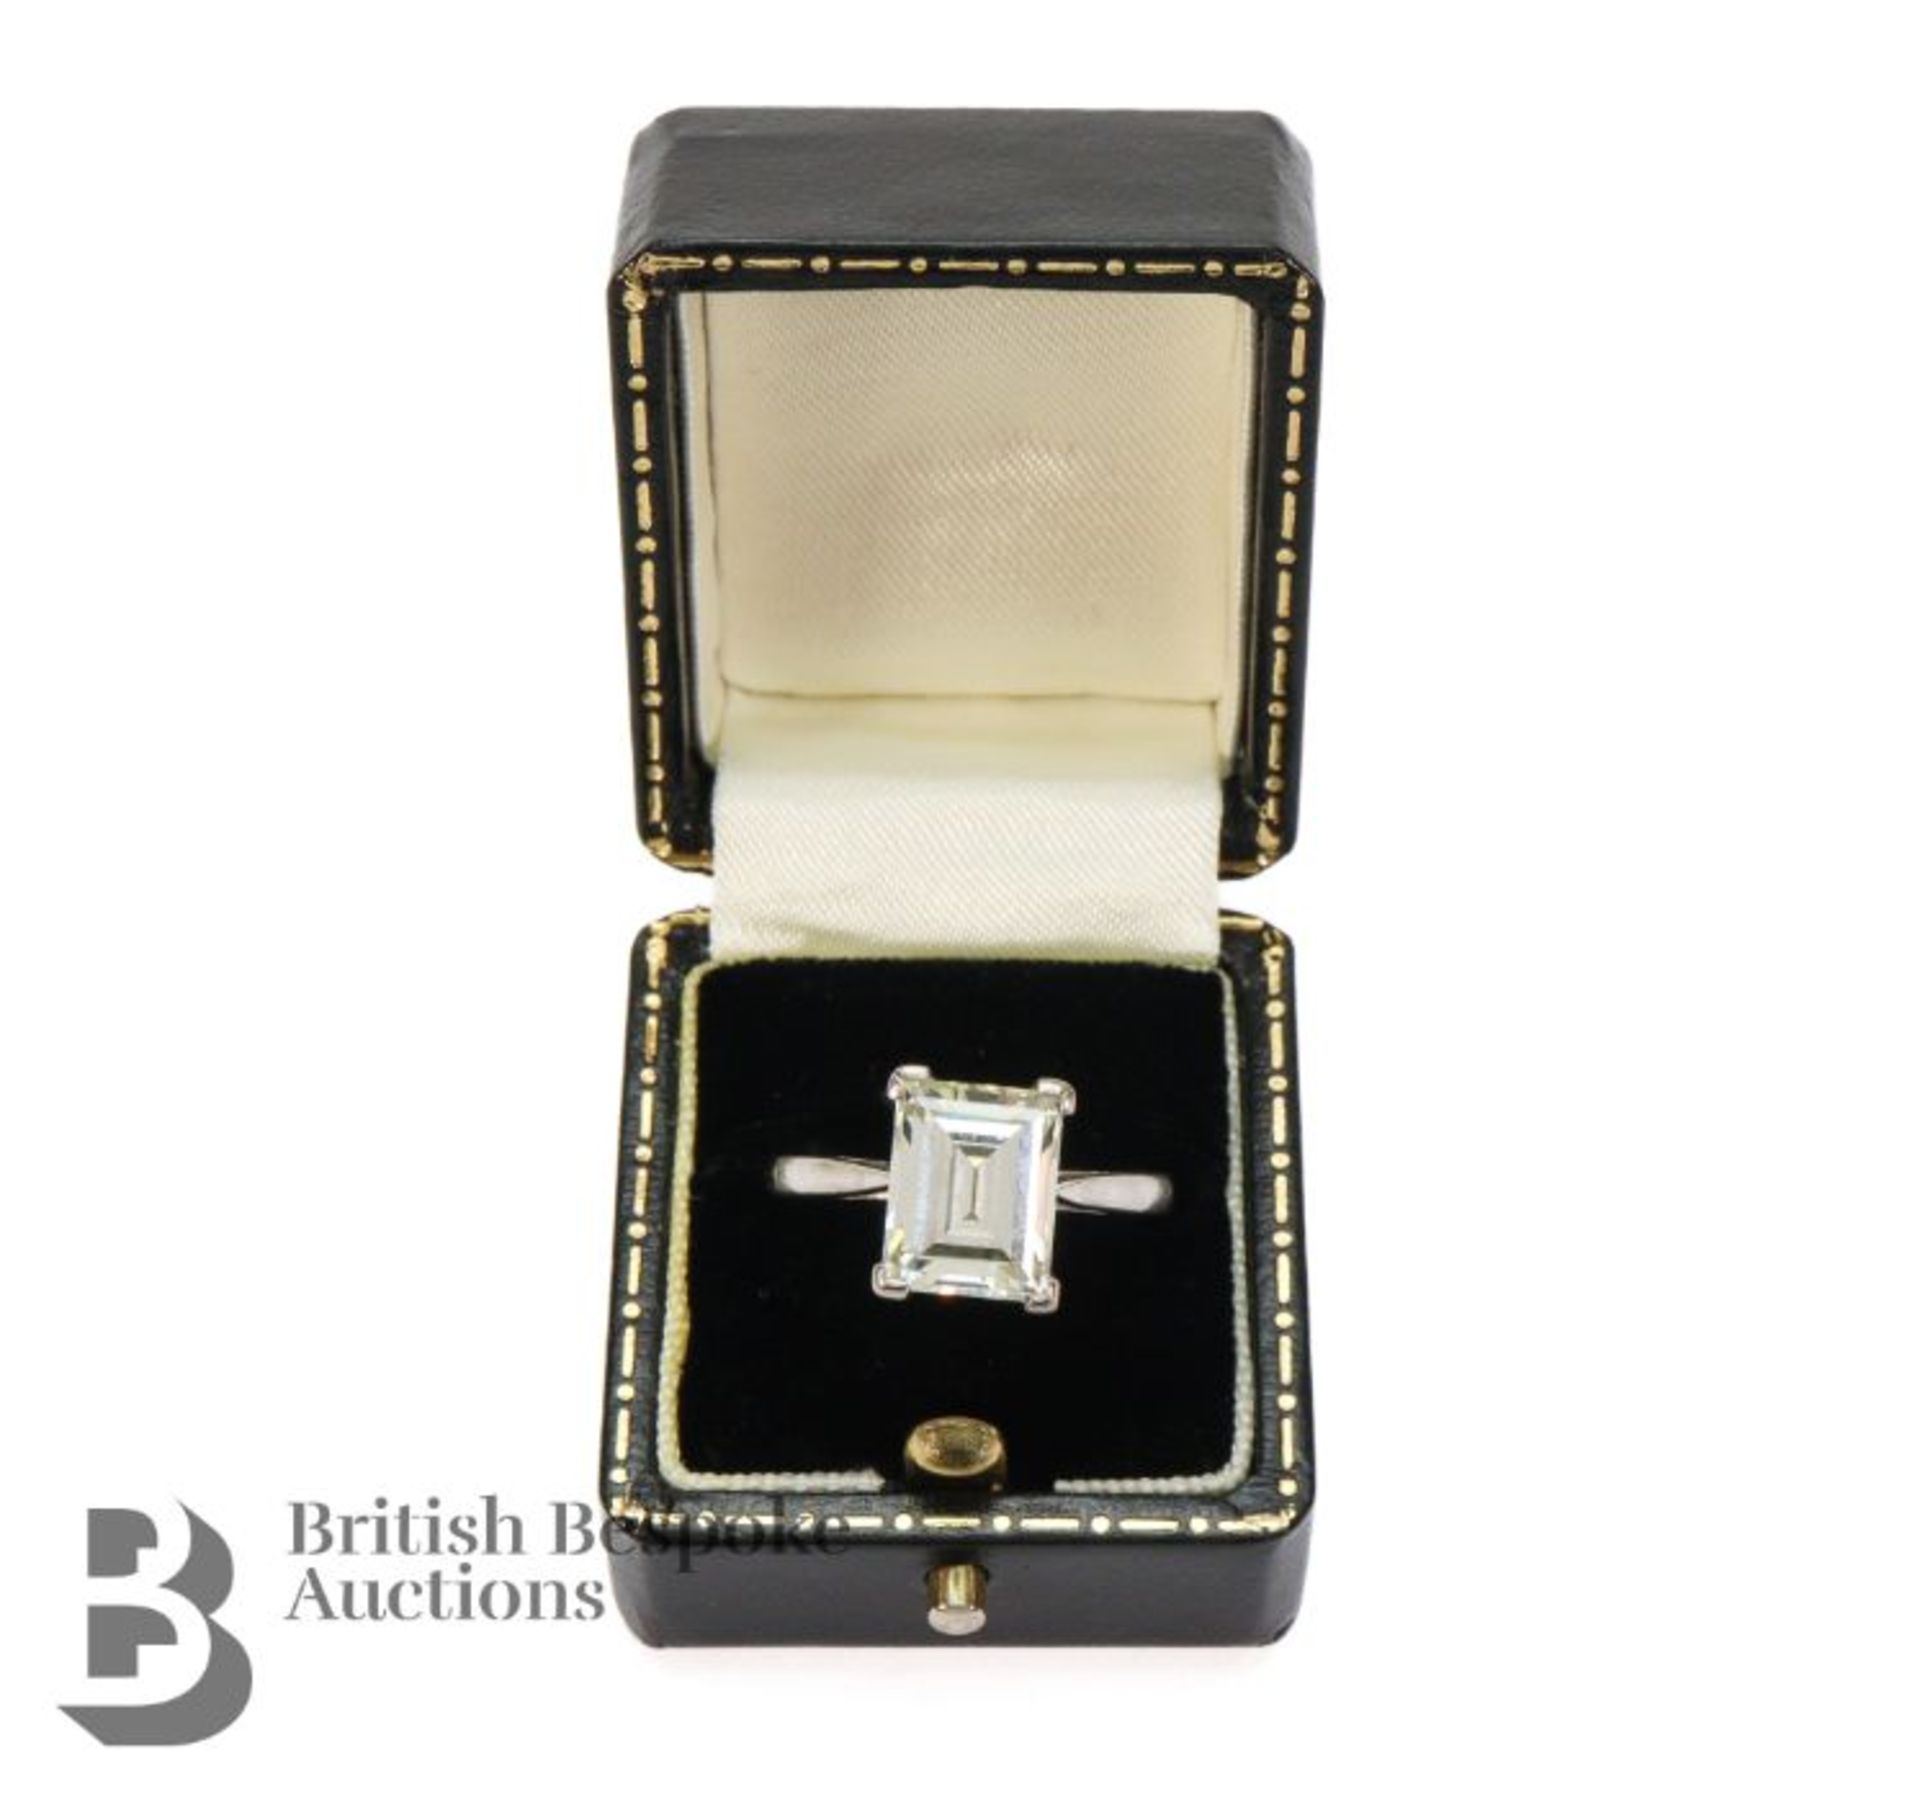 Stunning Vintage 18ct 4.39ct Solitaire Diamond Ring - Image 8 of 10